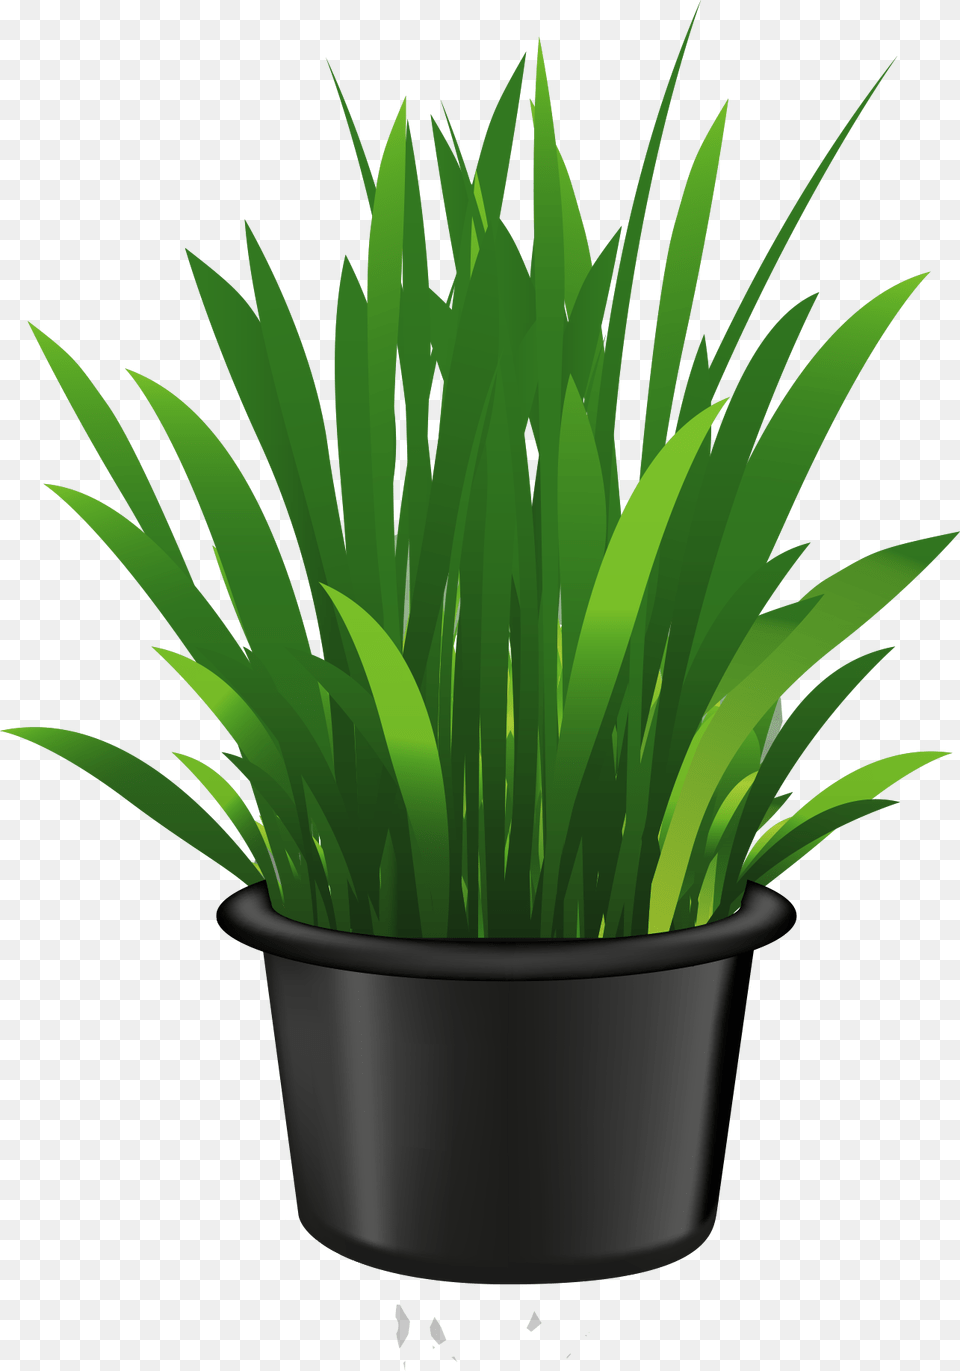 Plants In Pot Clipart, Grass, Vase, Pottery, Potted Plant Png